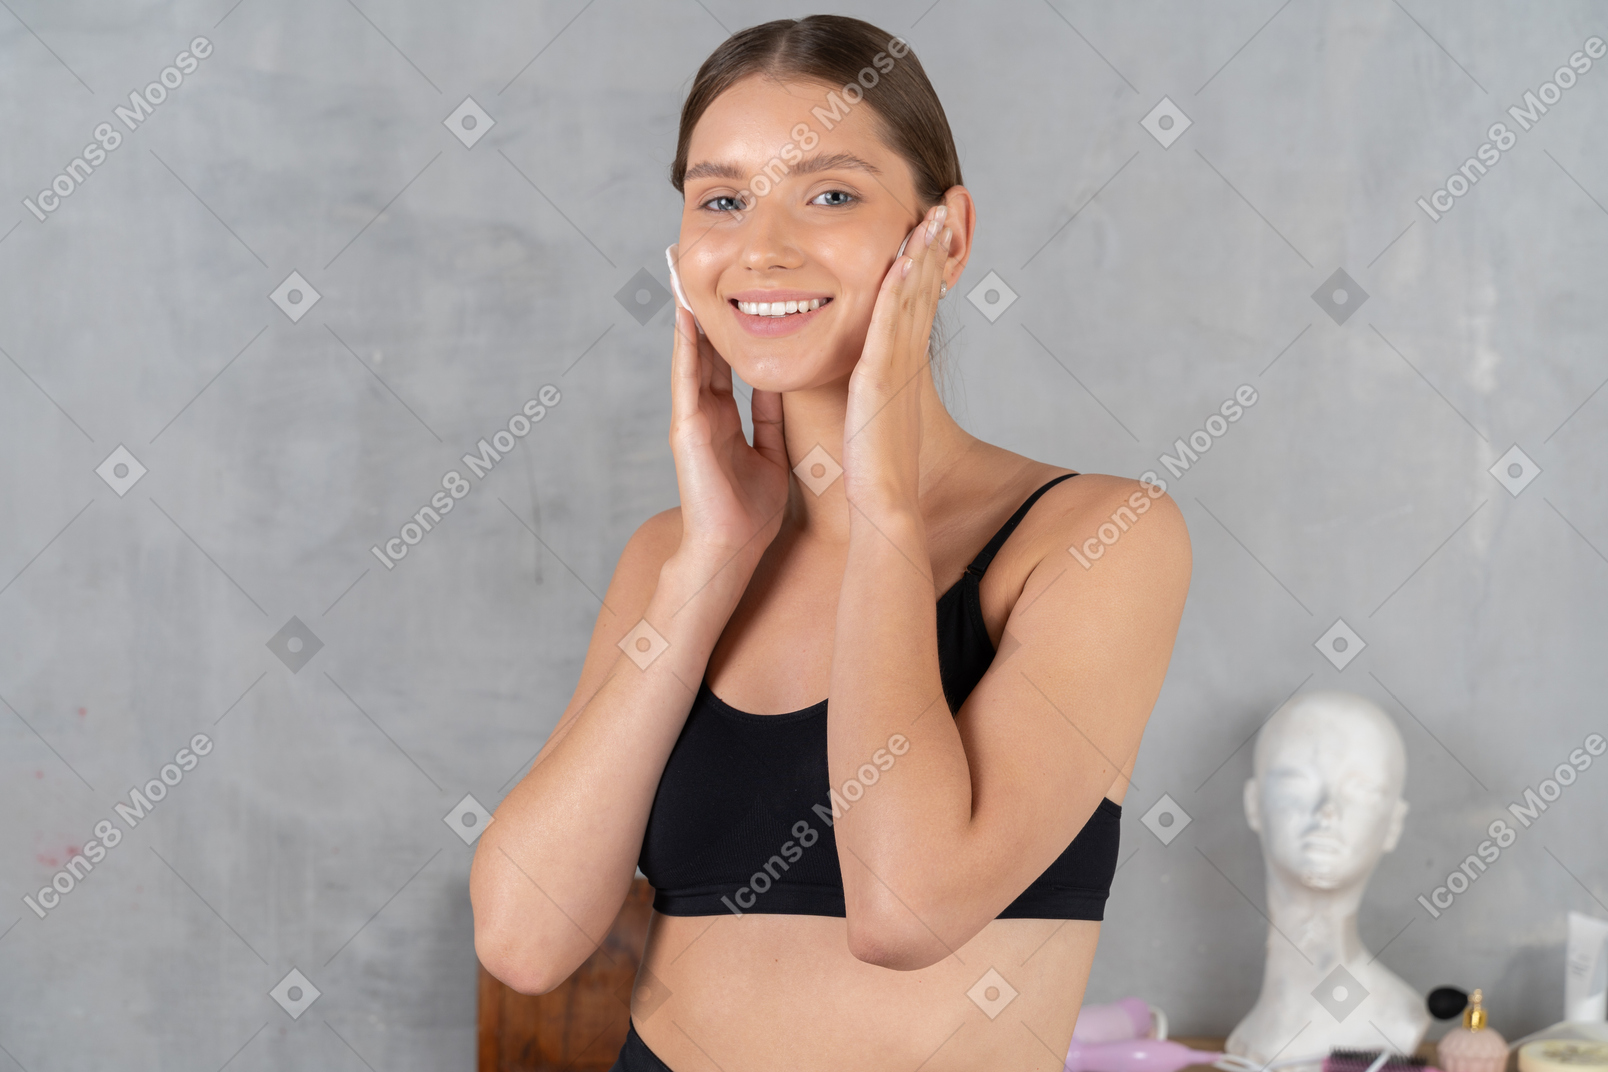 Smiling woman cleaning her face with cotton pads